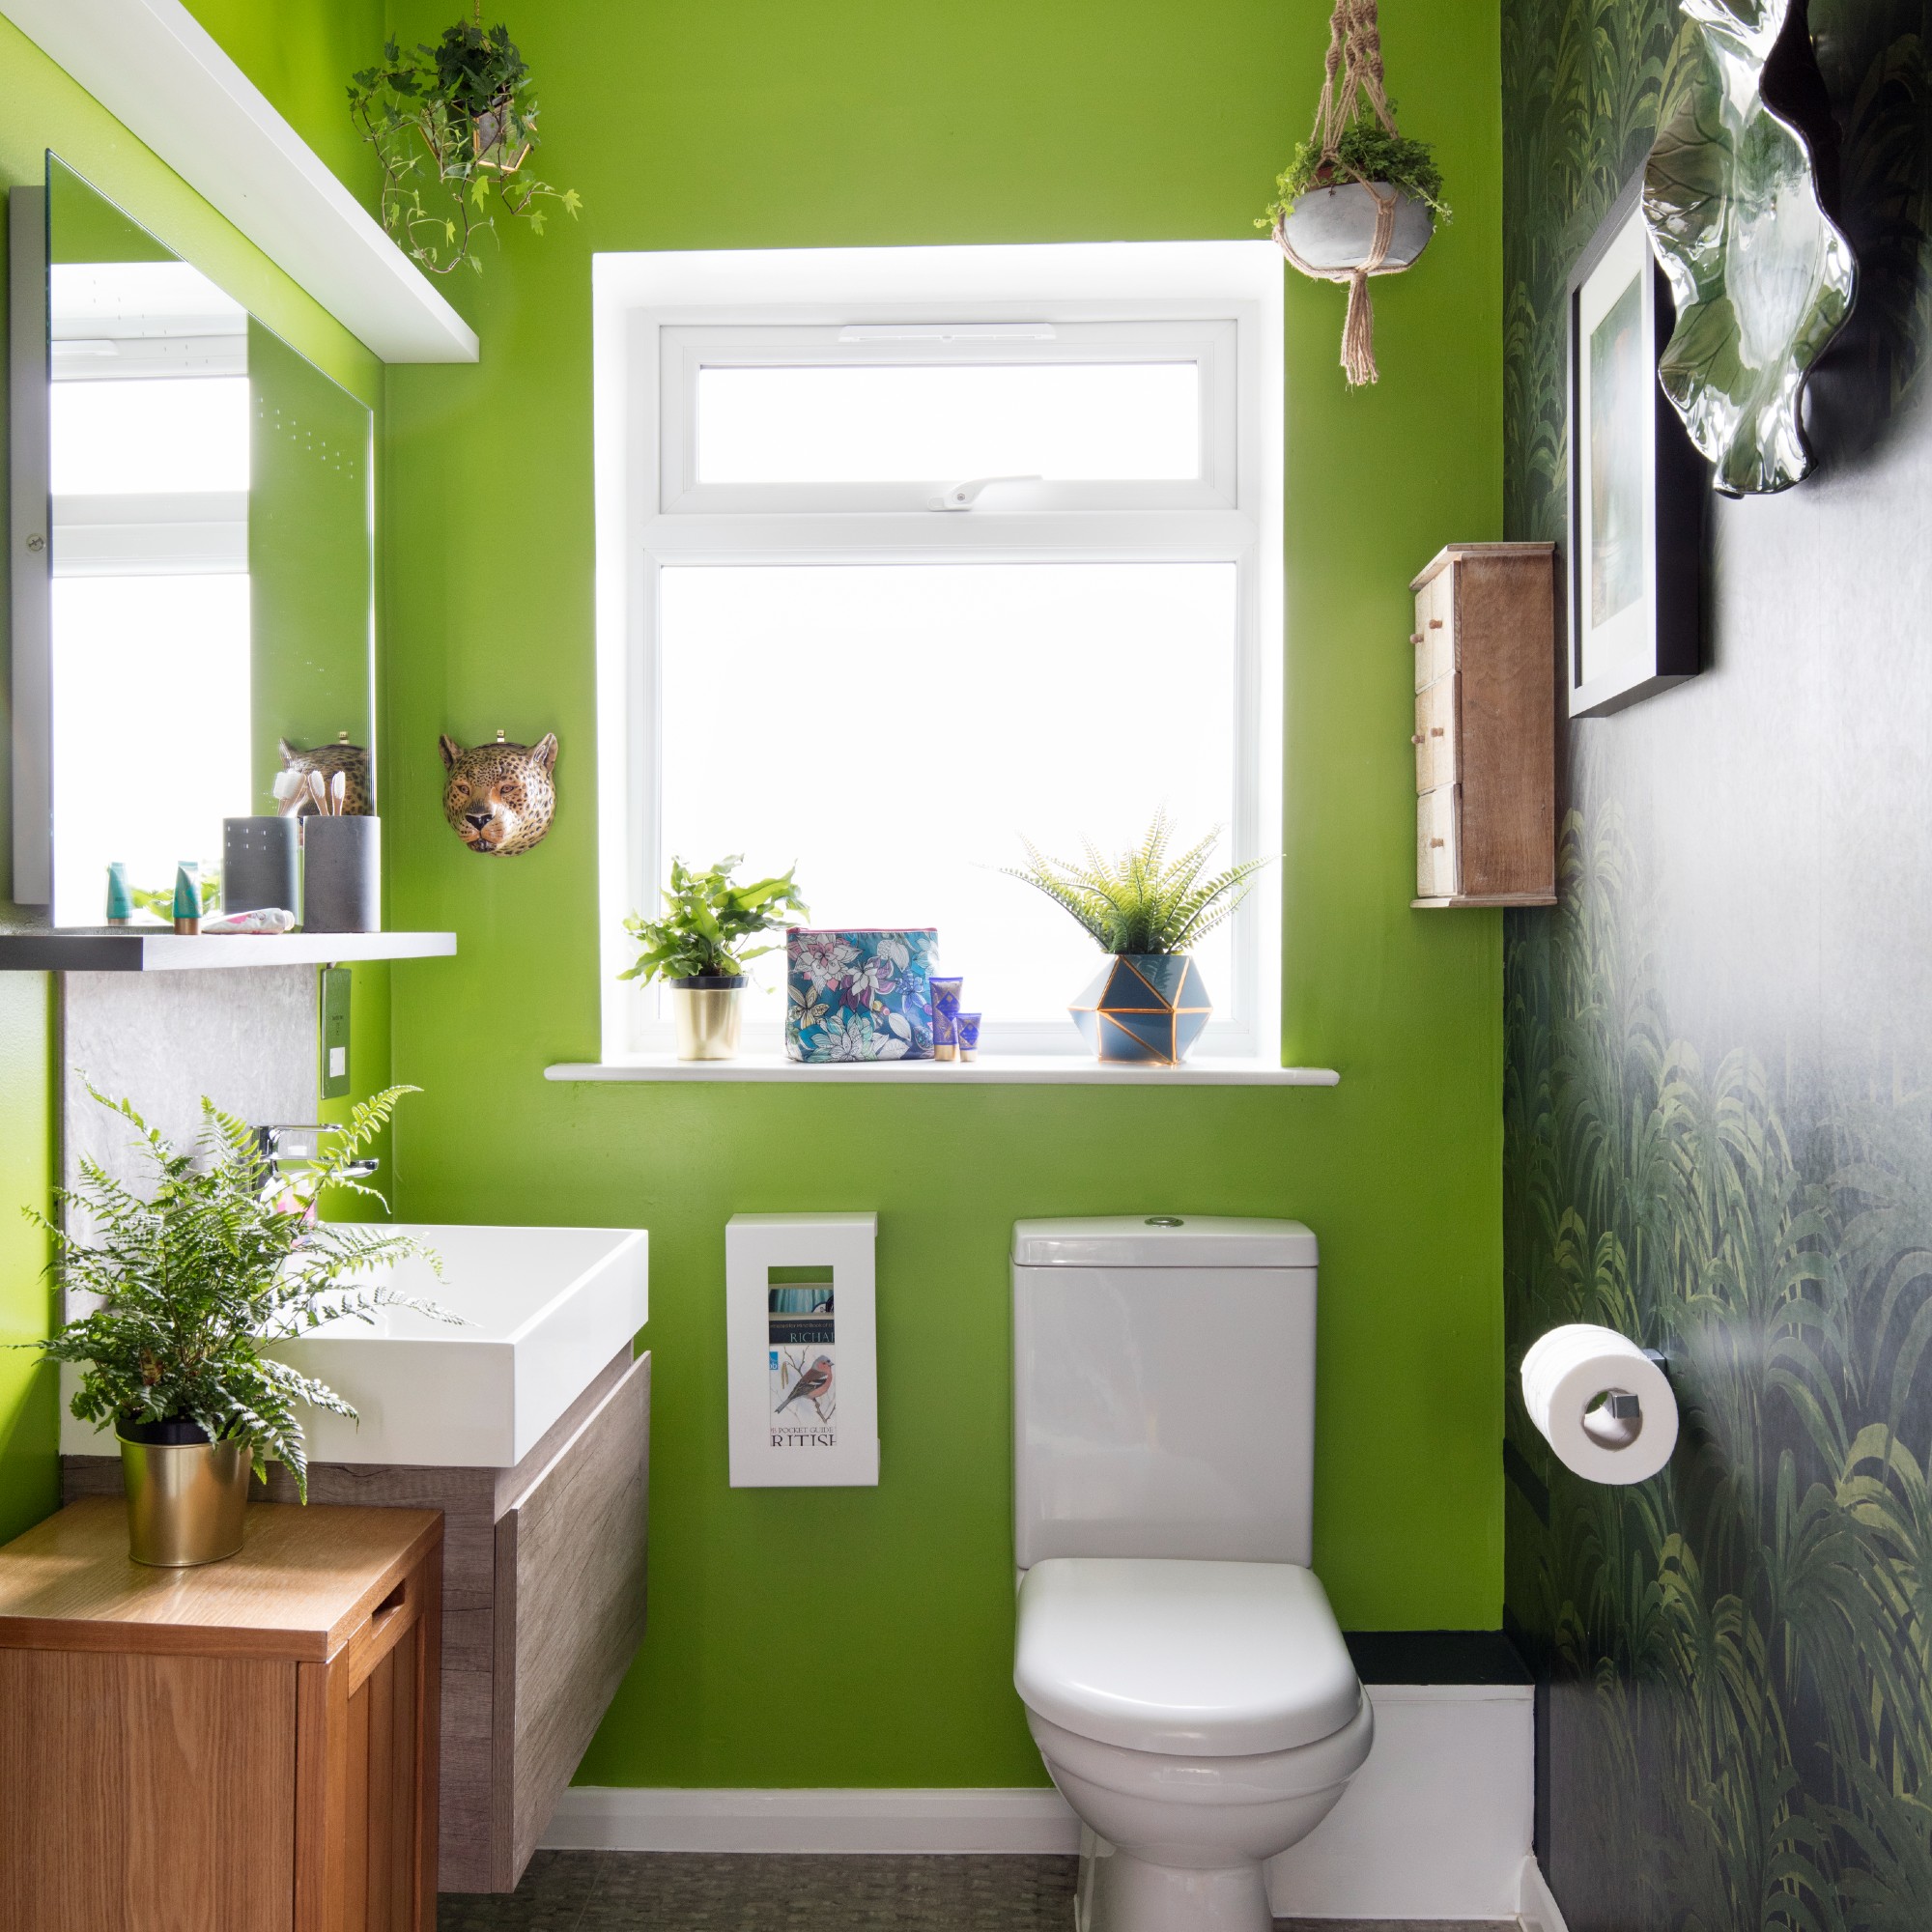 A cloakroom painted bright green